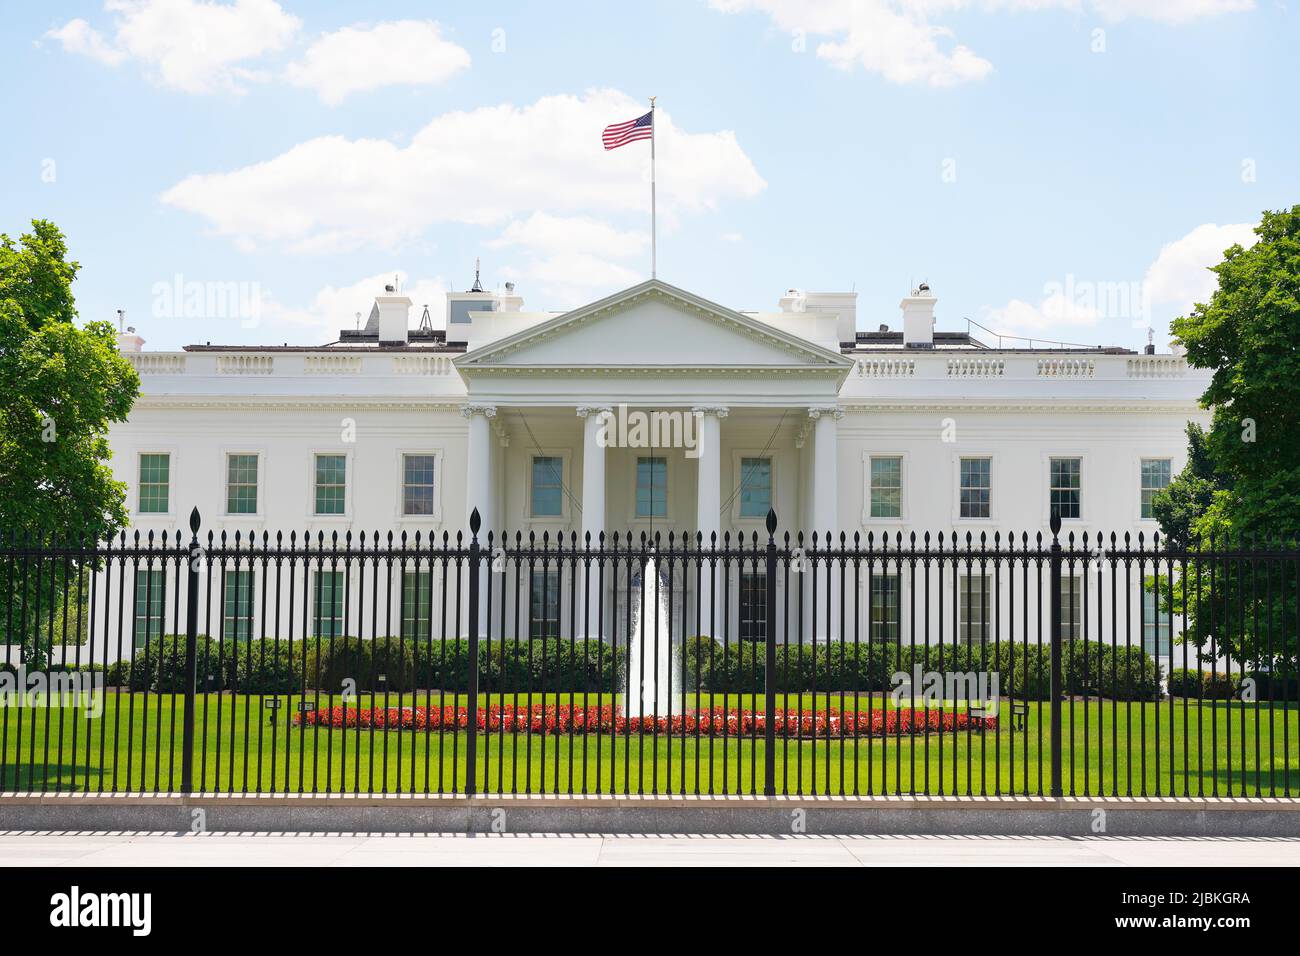 White House in 1600 Pennsylvania Avenue, Washington, D.C., USA. Official residence and workplace of the president of the United States. Stock Photo